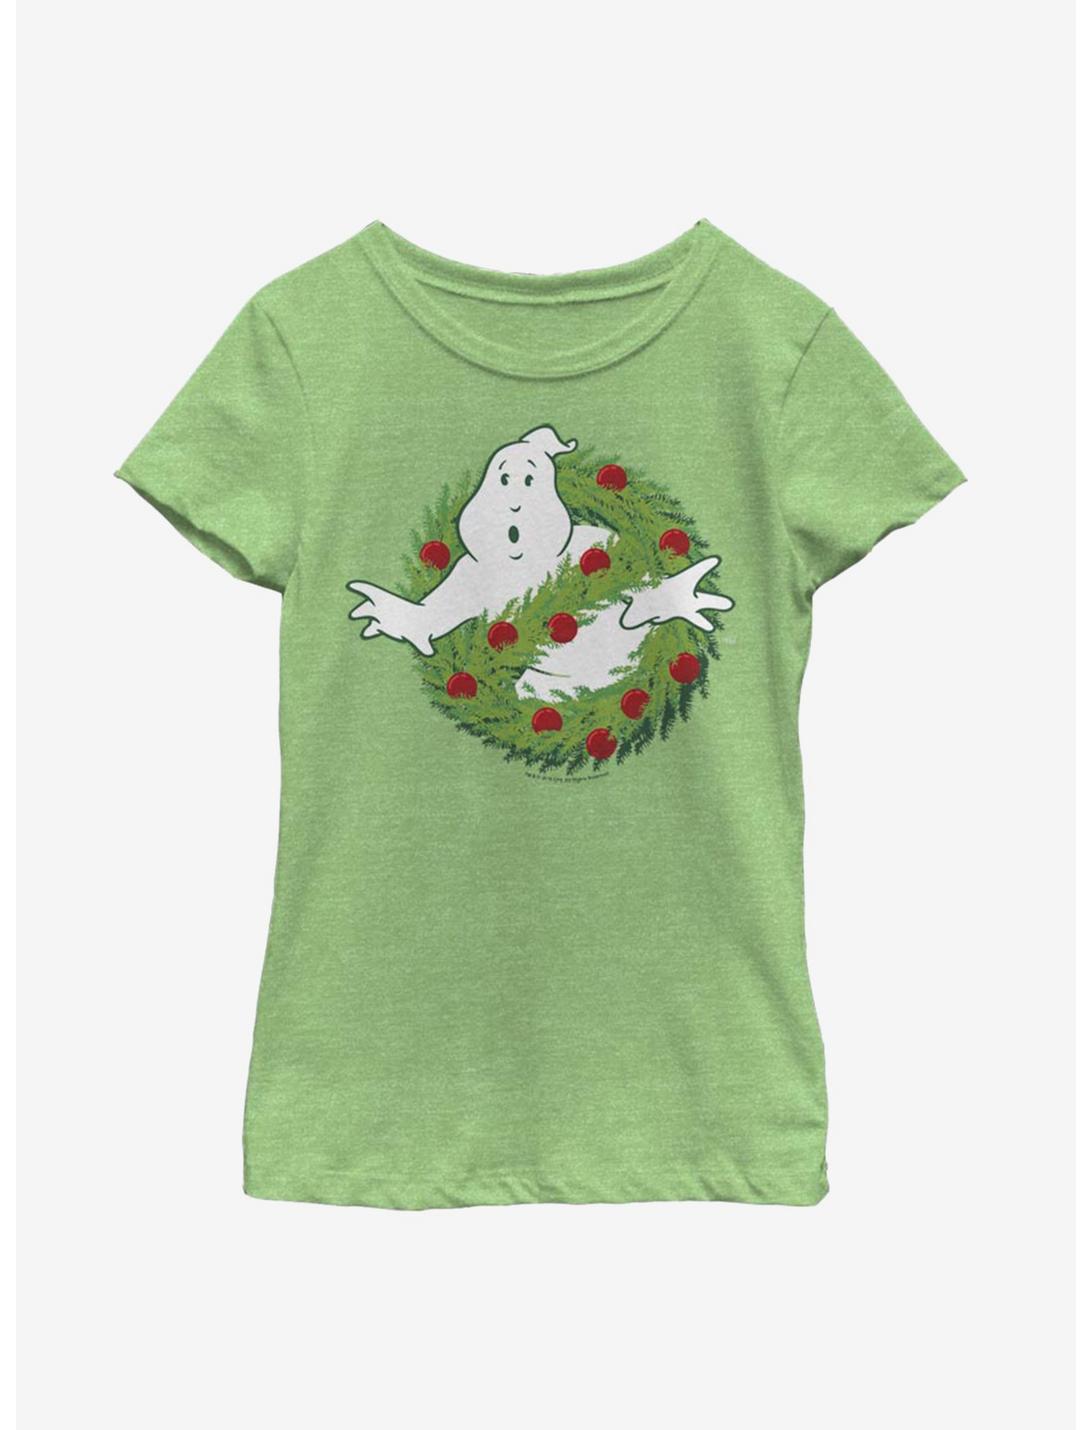 Ghostbusters Holiday Logo Youth Girls T-Shirt, , hi-res